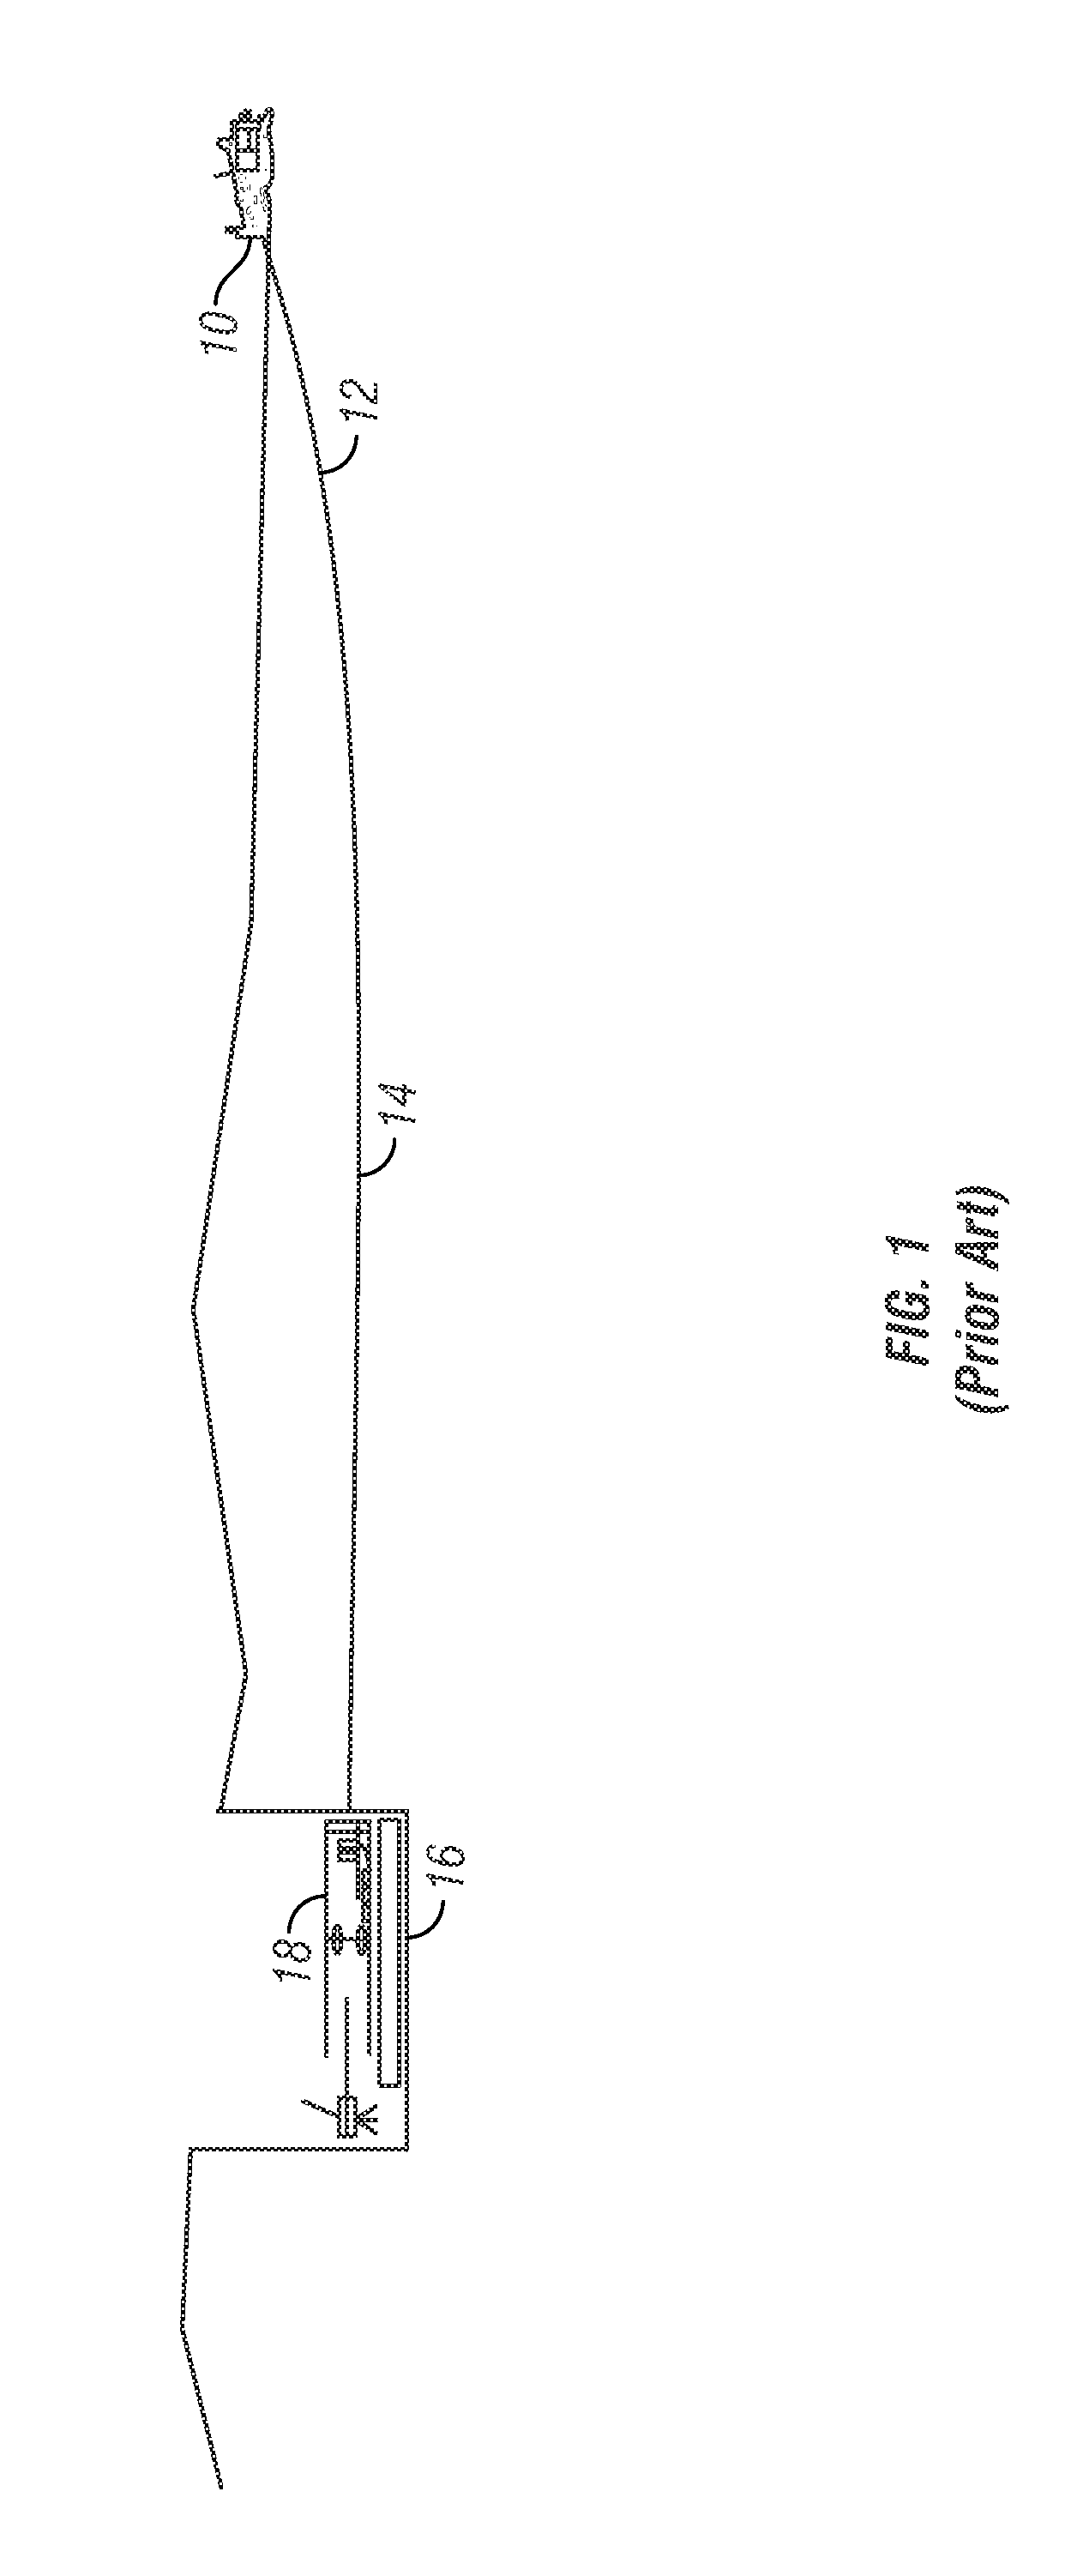 Sectional back reamer apparatus and method for horizontal directional drilling